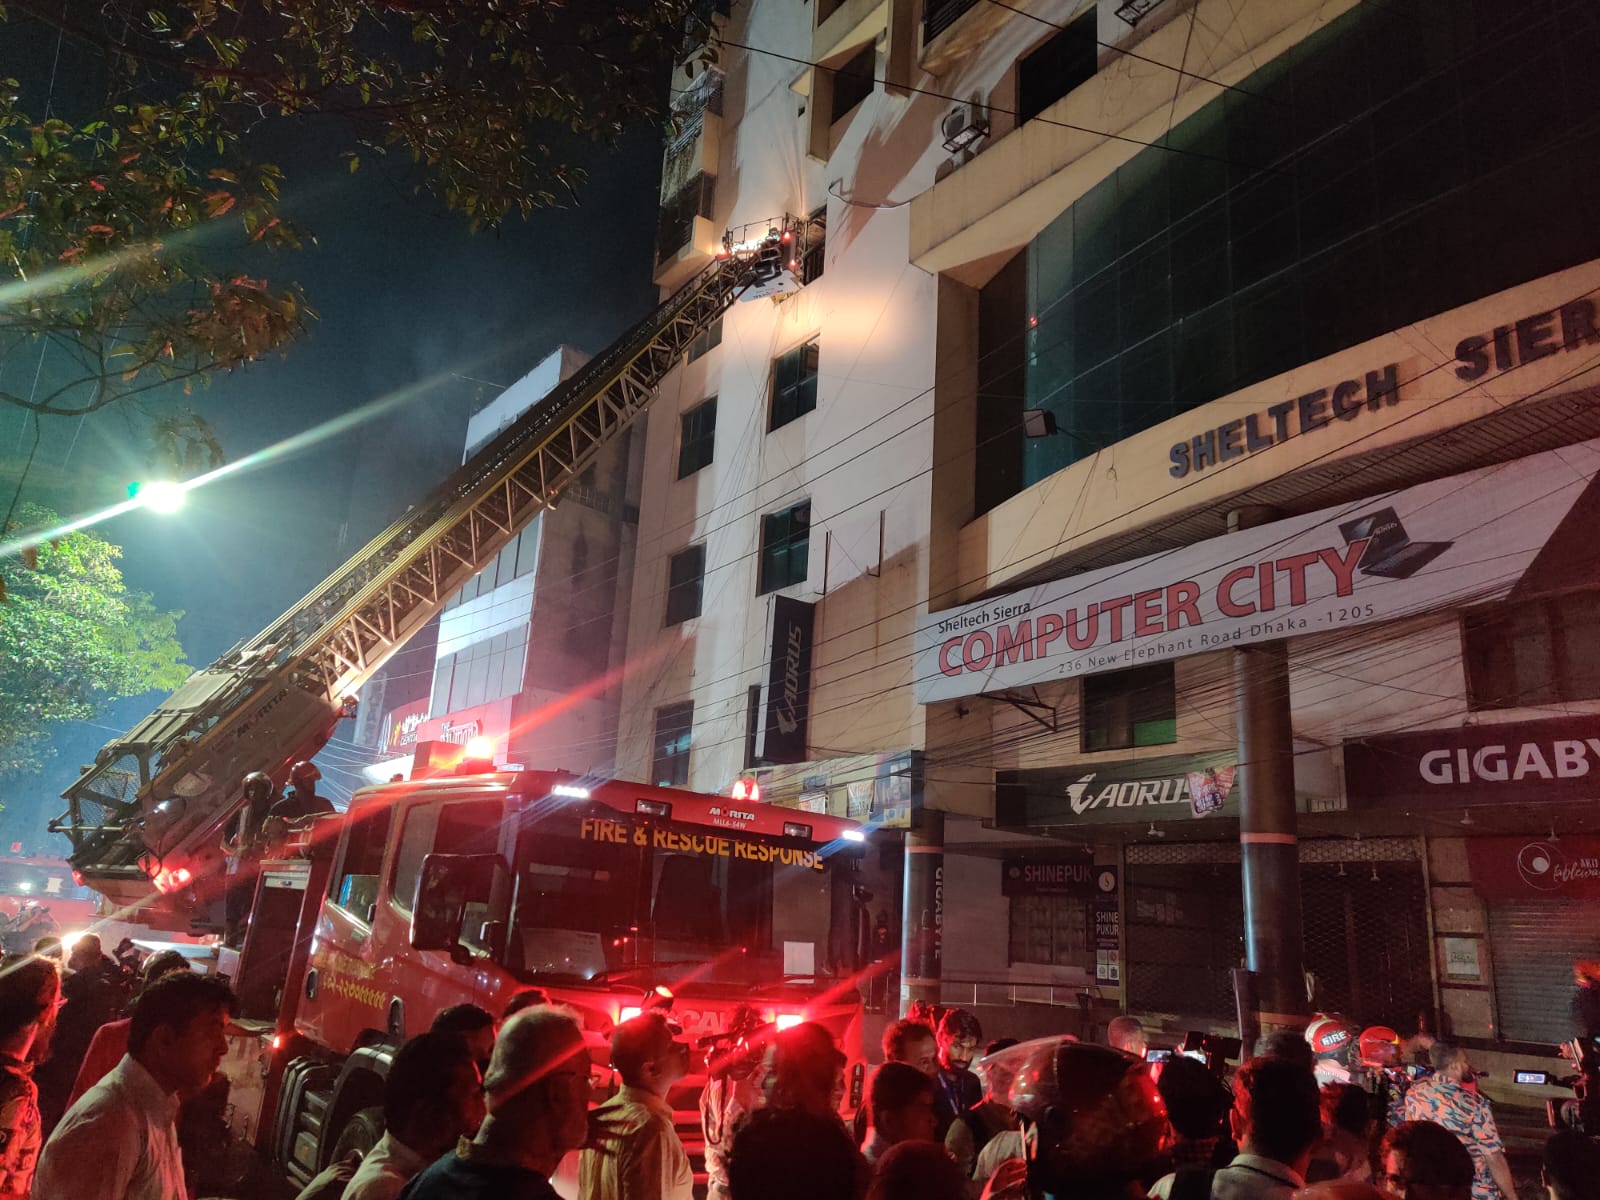 Building catches fire in Elephant road, 9 units under control